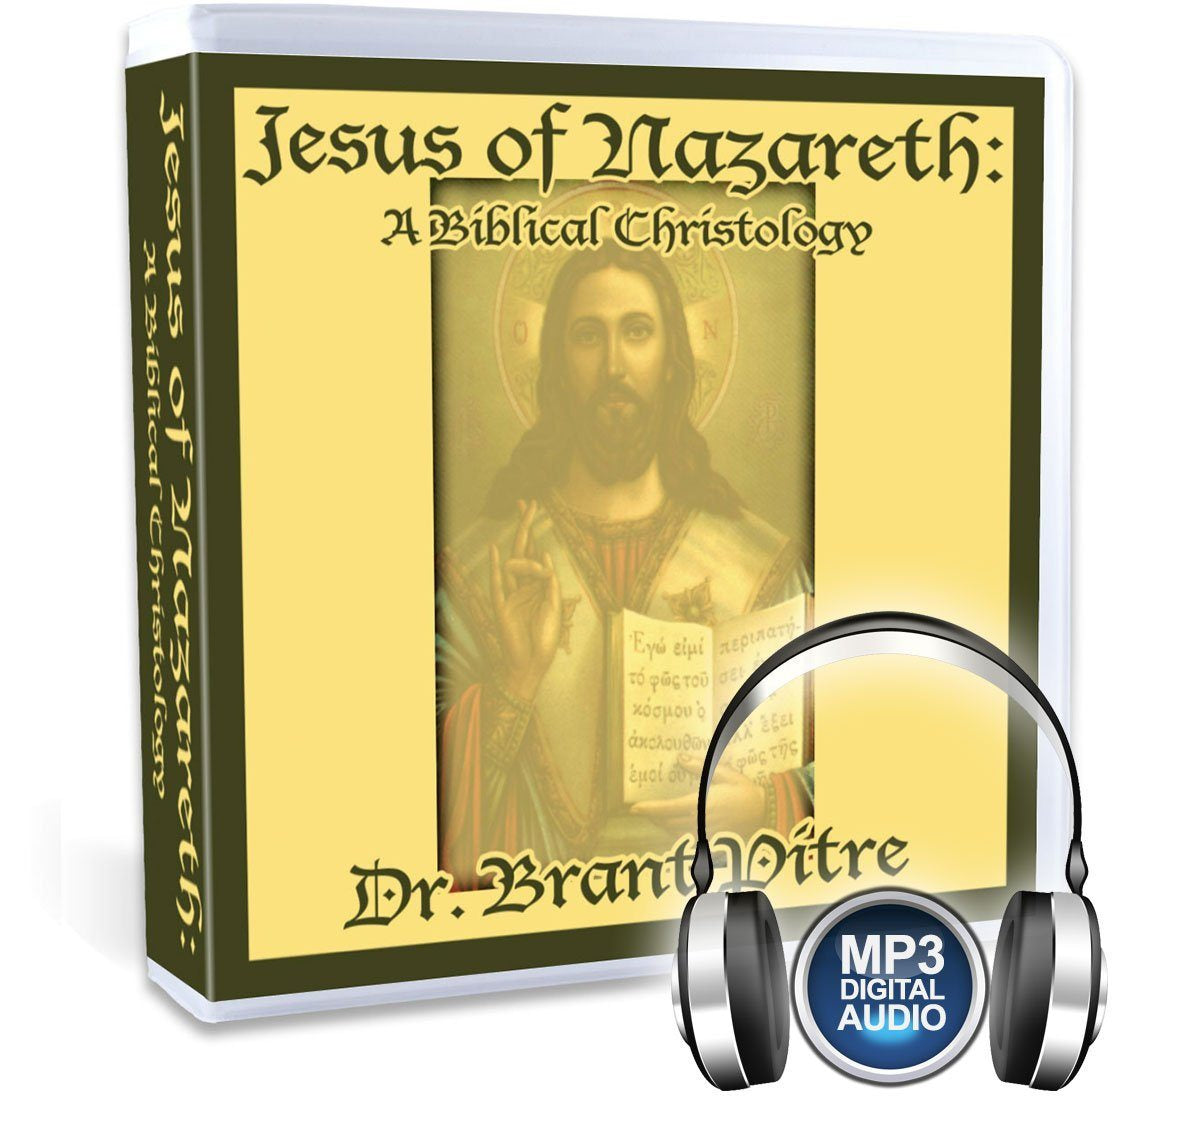 Dr. Brant Pitre gives a Biblical Christology, touring you through the mysteries of Jesus in the Gospels, Jesus' proclamation of the Kingdom of God, and Jesus' self-identity as the Messiah in this Catholic Bible study on CD.